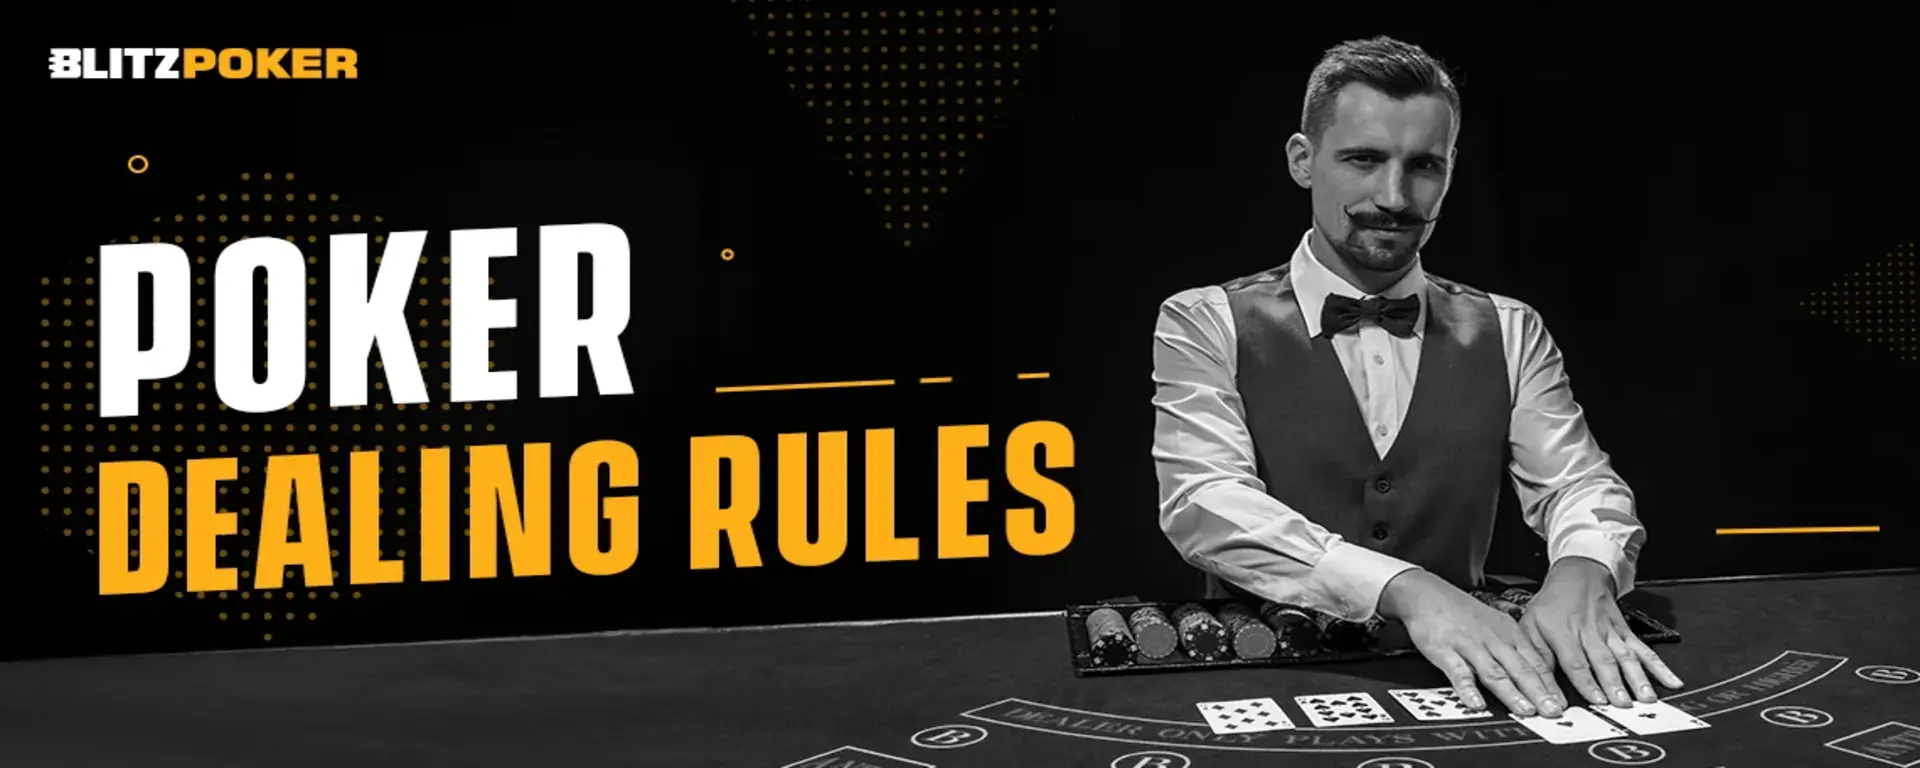 Poker Dealing Rules: How To Deal Cards in Poker